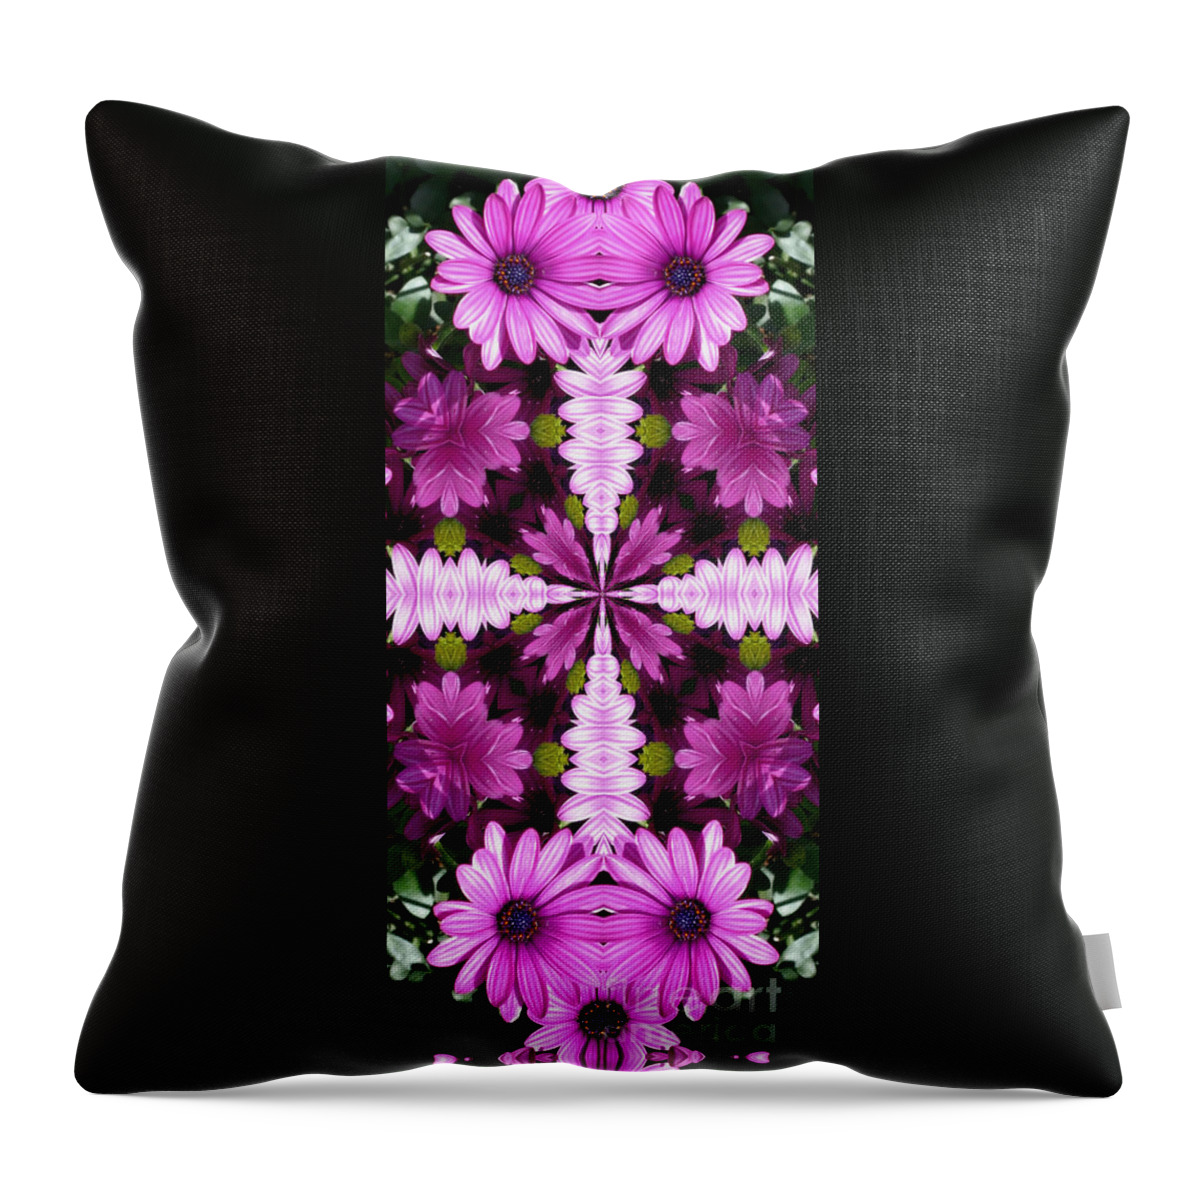 Daisy Throw Pillow featuring the digital art Abstract Daisies by Smilin Eyes Treasures